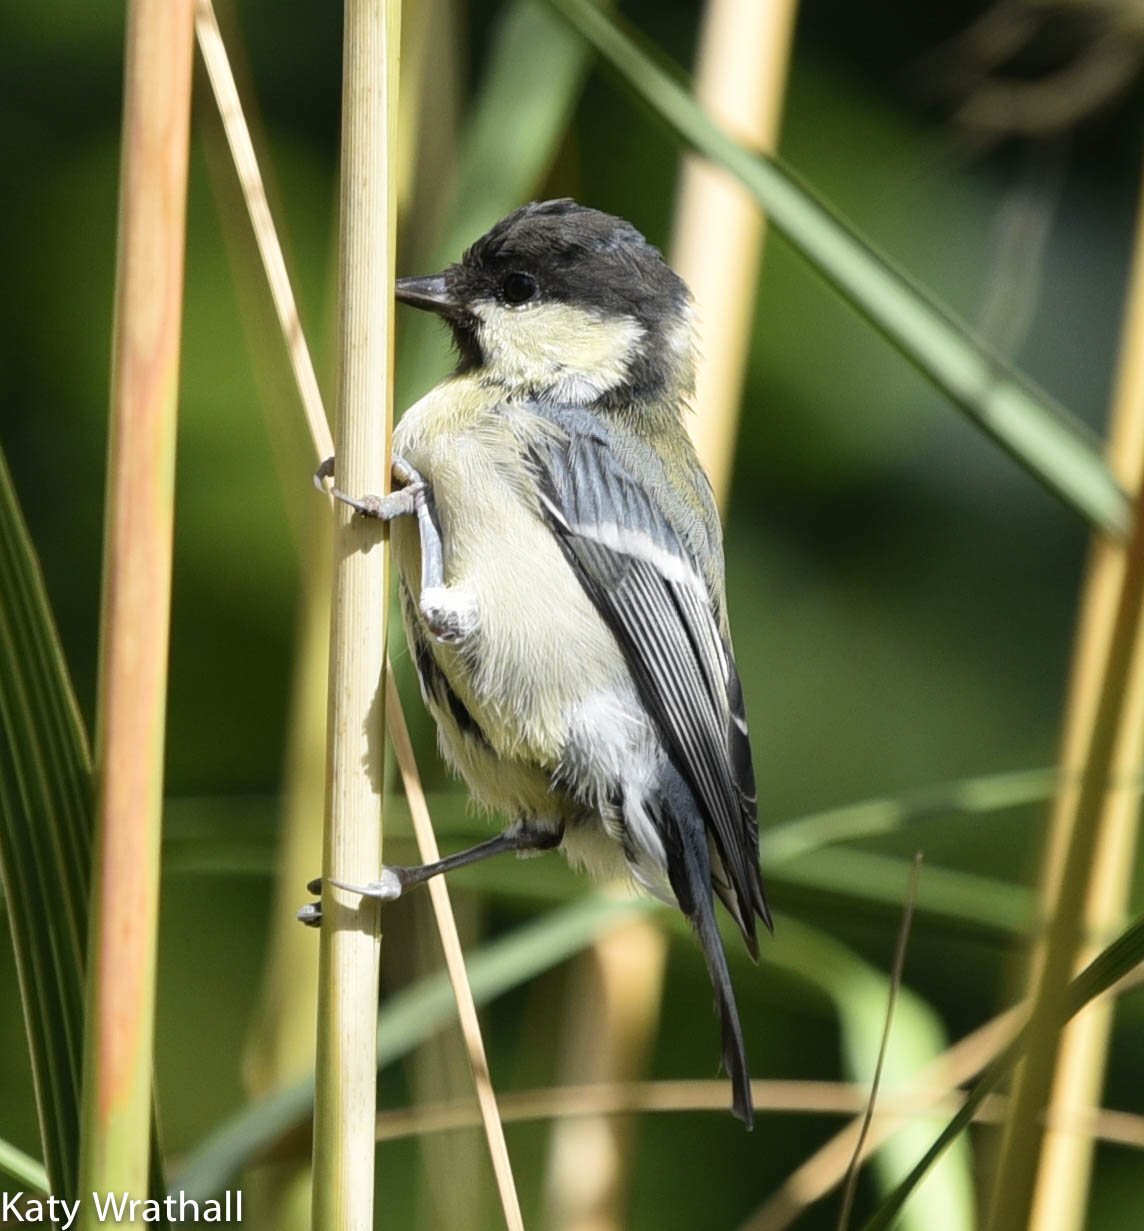 image of white small bird on a stalk of grass. wing feathers are gray